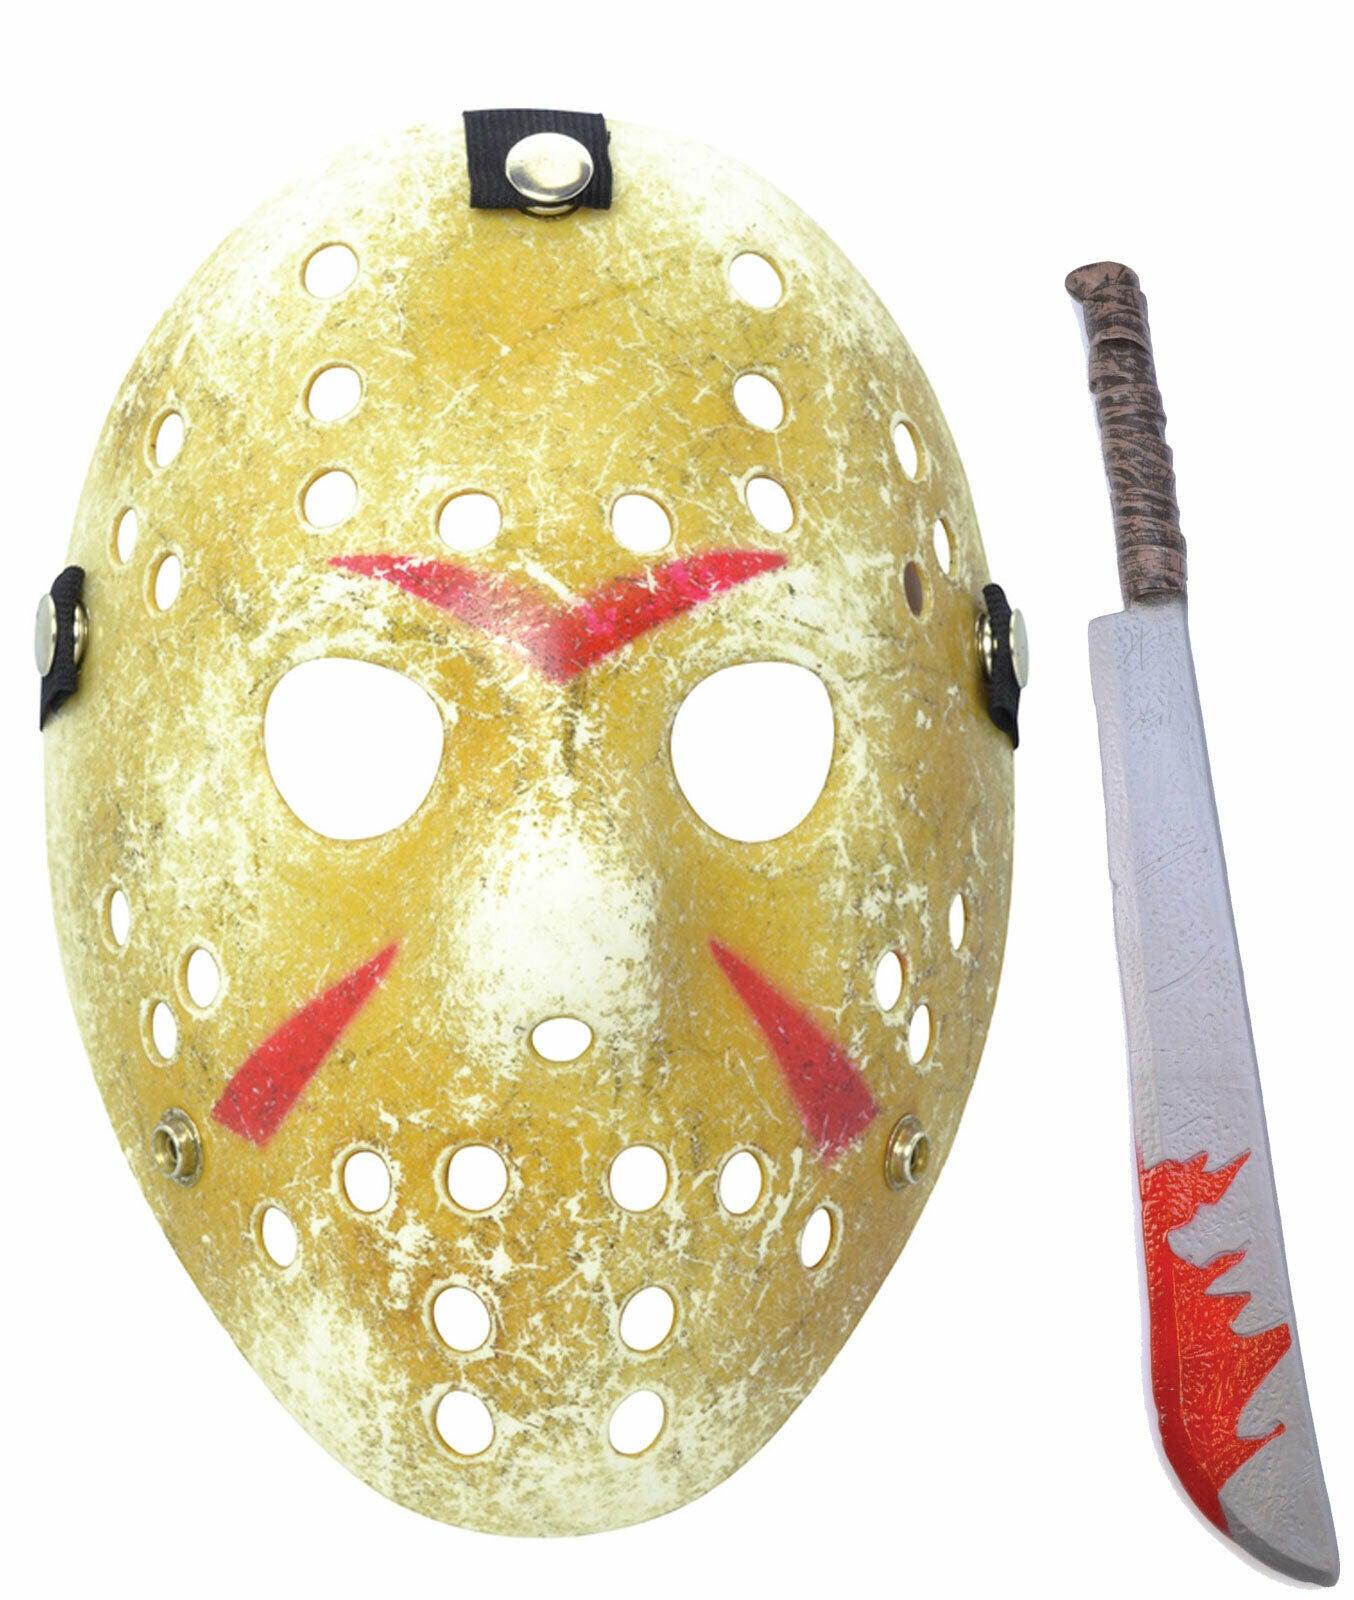 Scary Painted Hockey Mask Jumbo Blooded Machete Halloween Horror Party Set - Labreeze